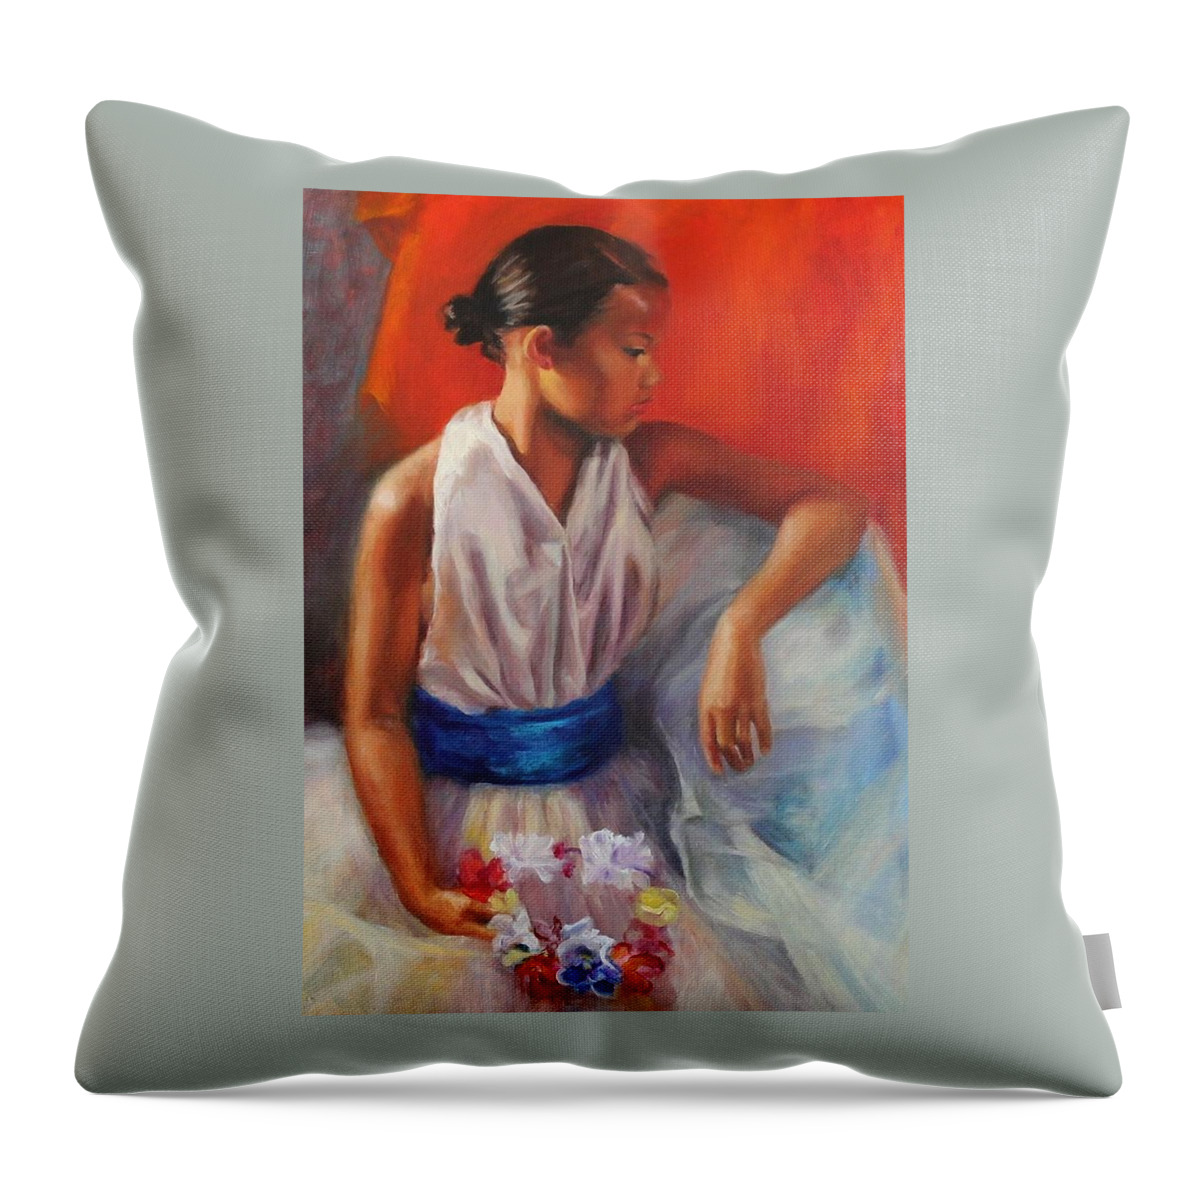 Portrait Throw Pillow featuring the painting Flowery Tiara by Marian Berg